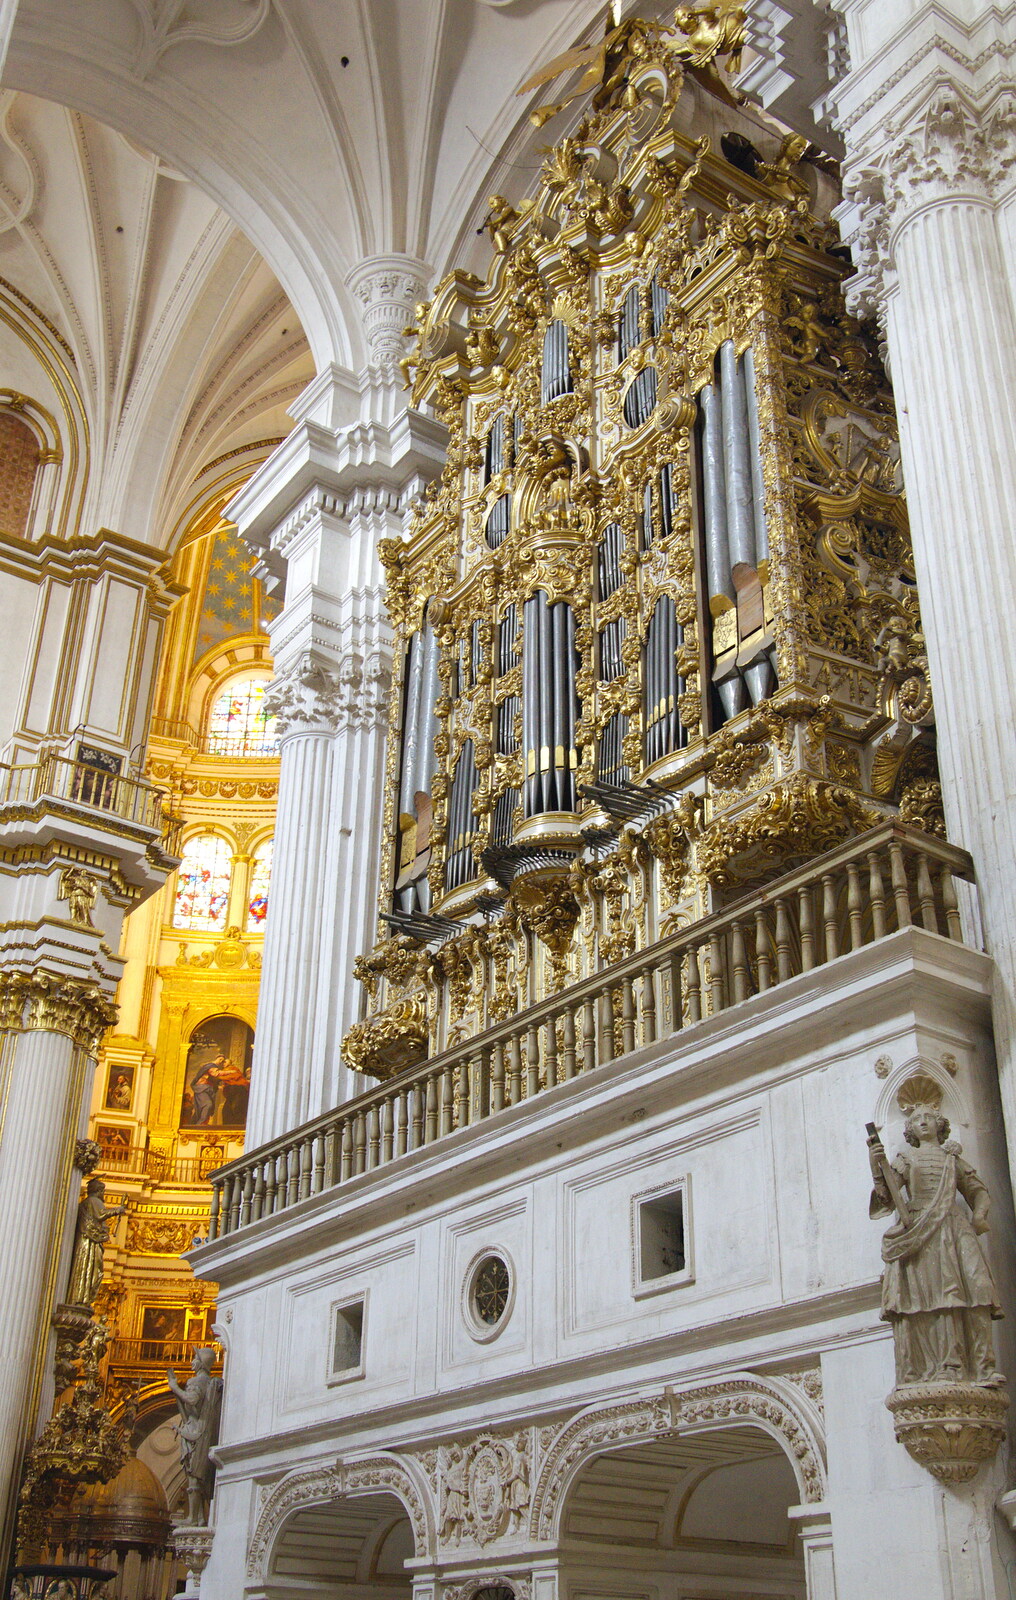 A very ornate church organ from A Walk up a Hill, Paella on the Beach and Granada, Andalusia, Spain - 19th April 2018